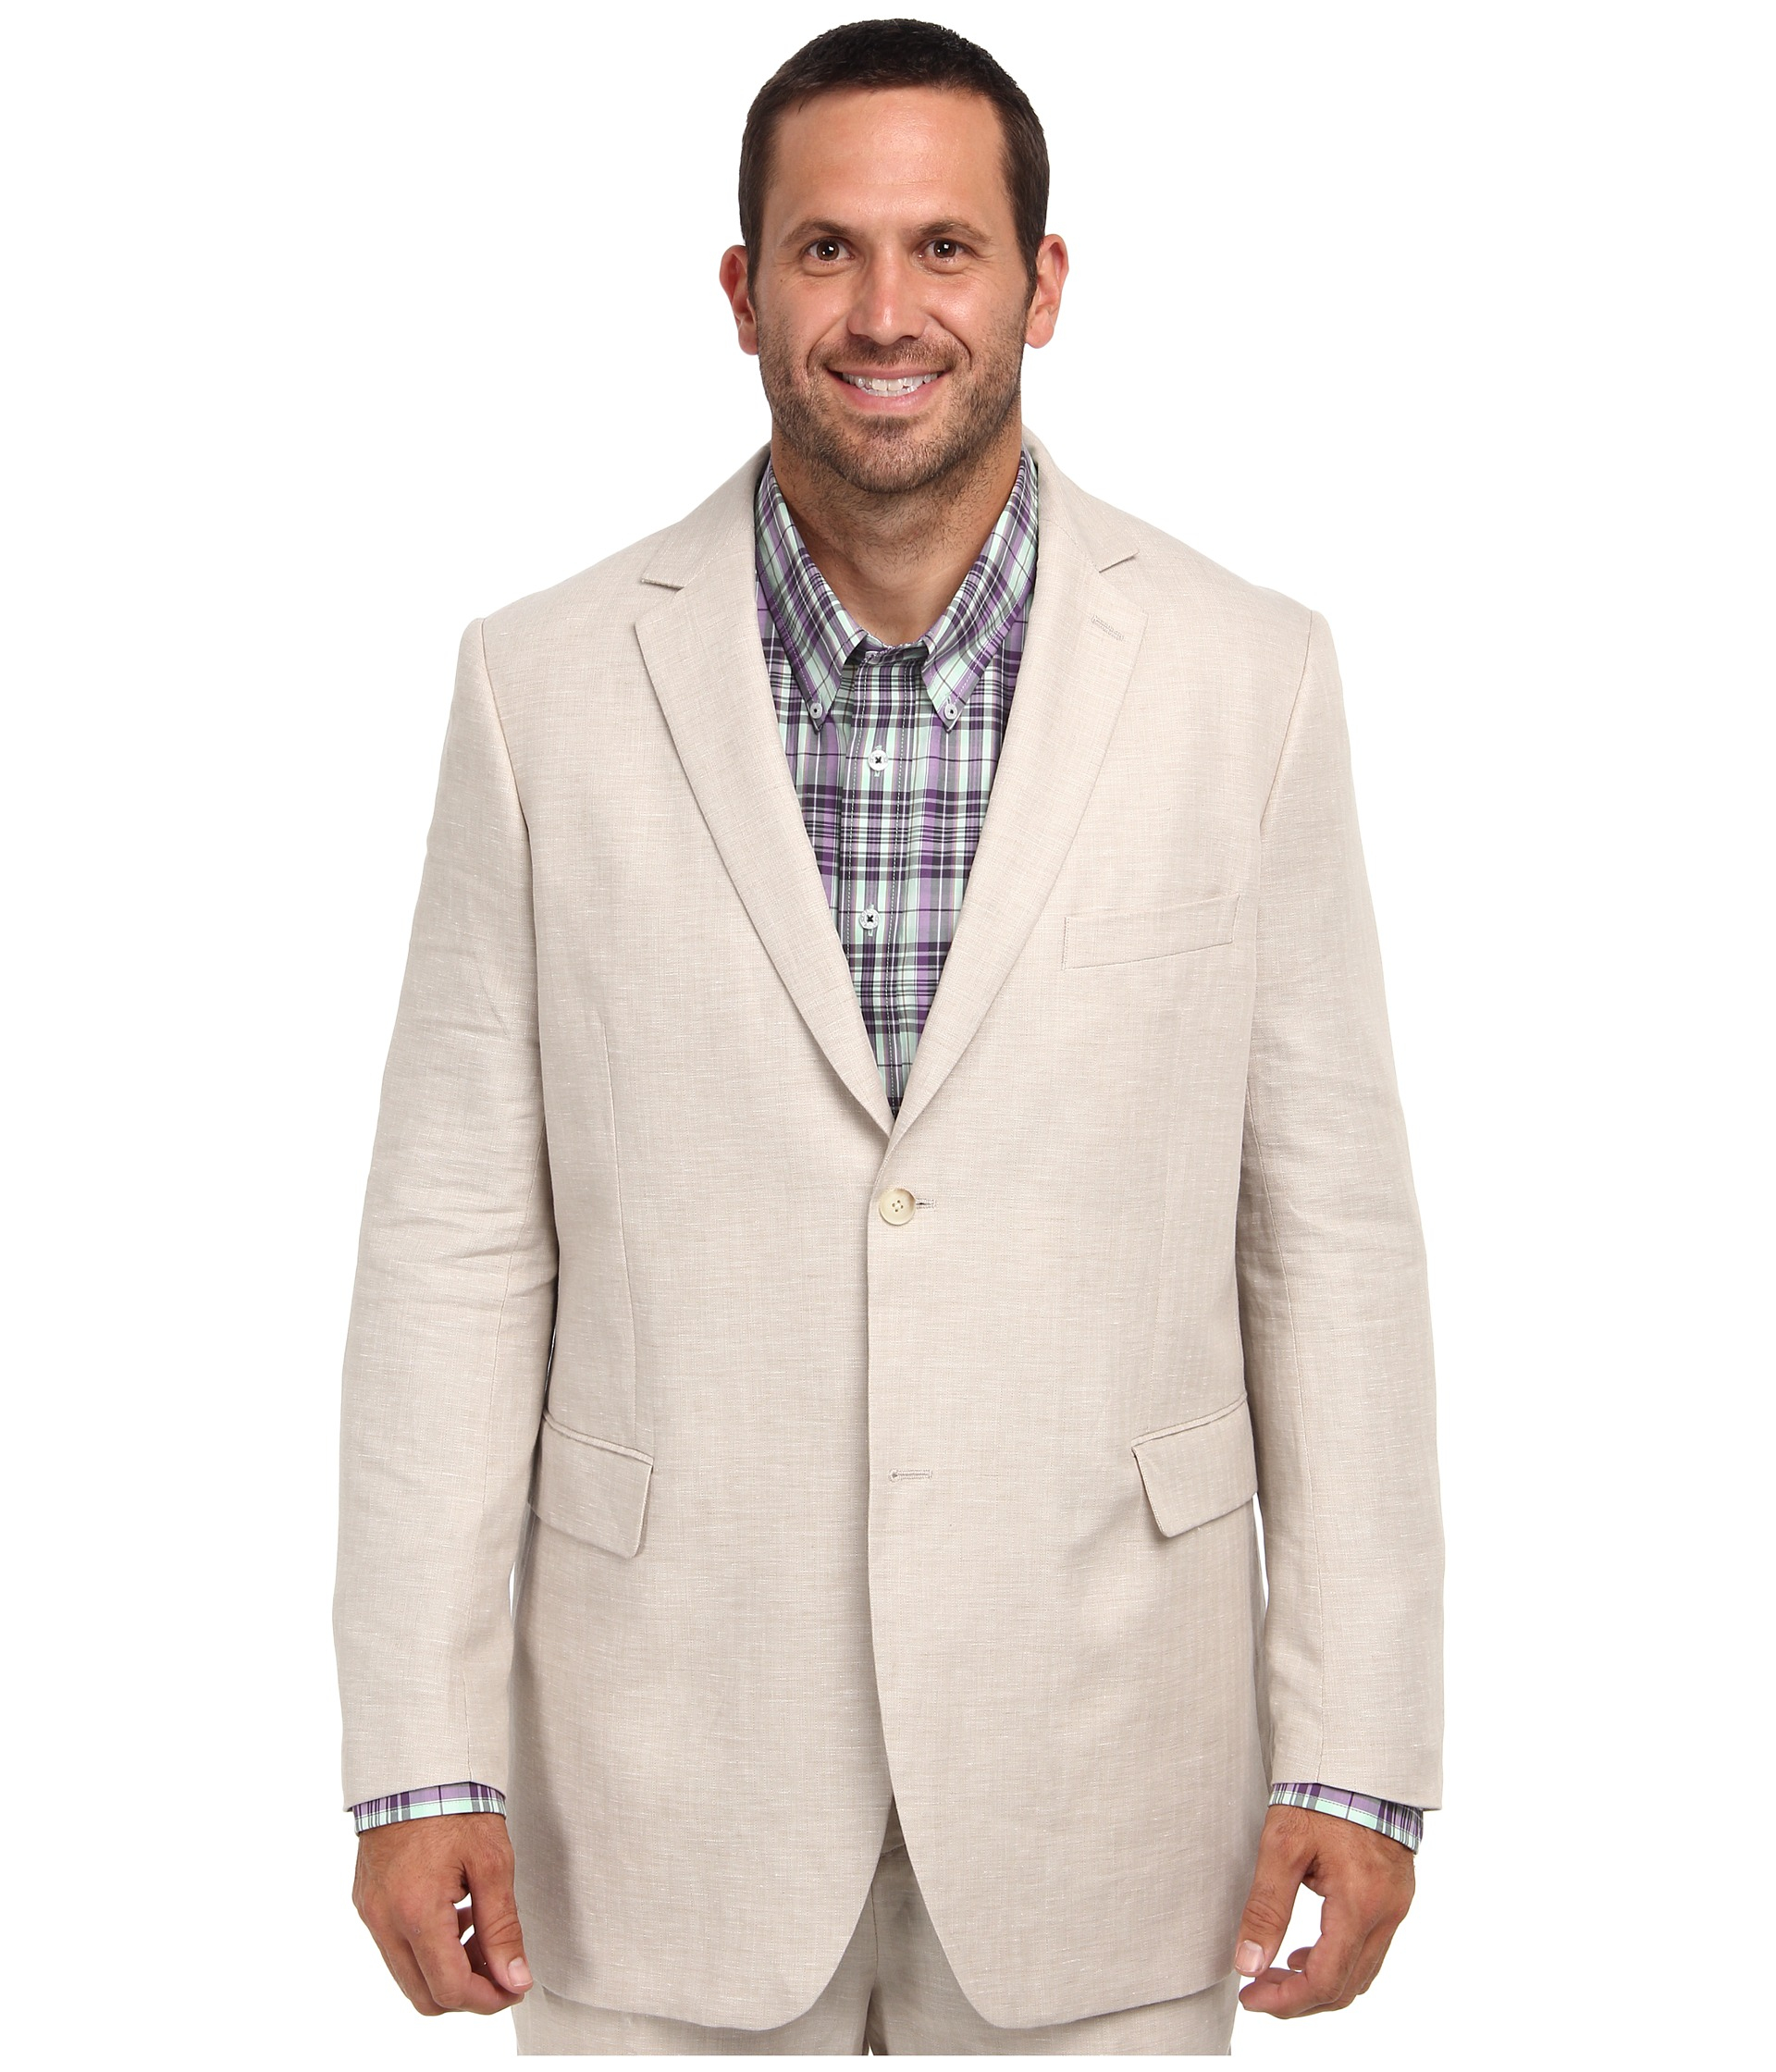 Lyst - Perry Ellis Big and Tall Linen Suit Jacket in White for Men